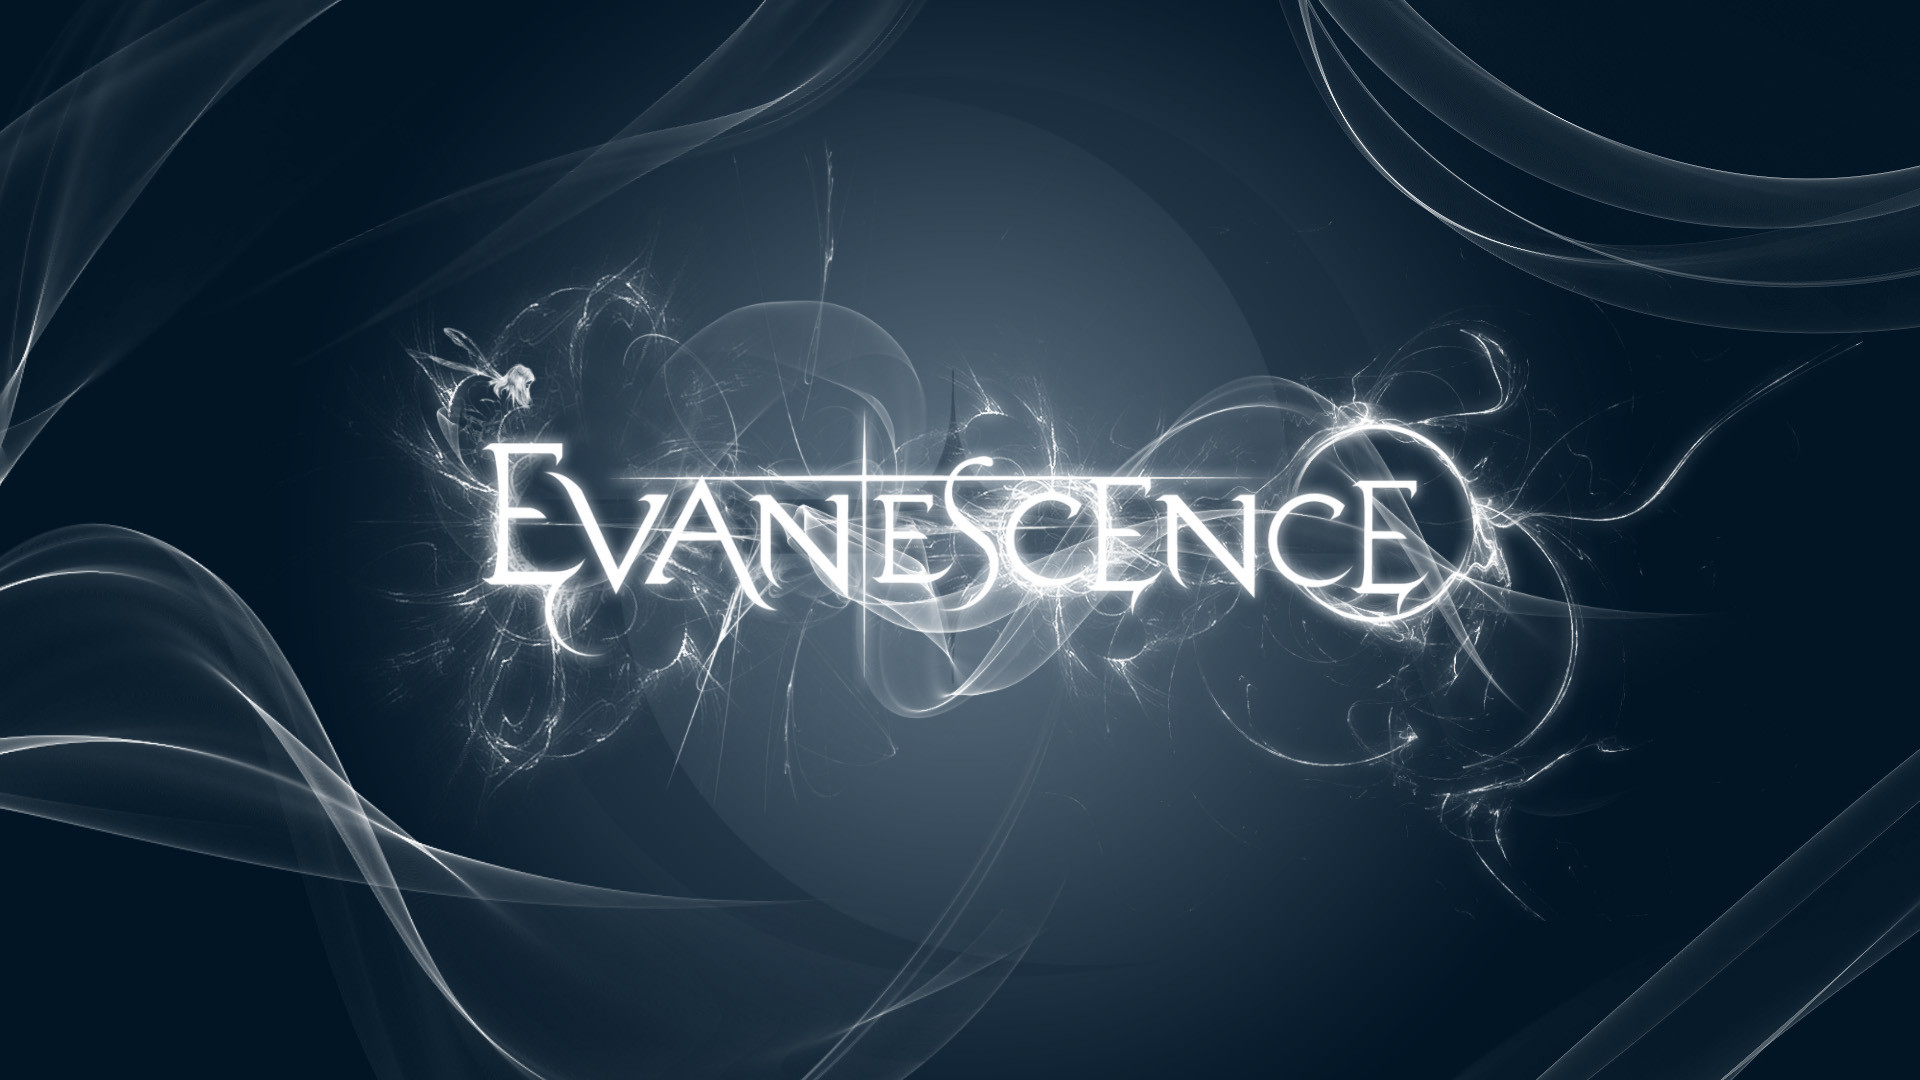 1920x1080 ... Evanescence Logo Wallpapers - Wallpaper Cave ...